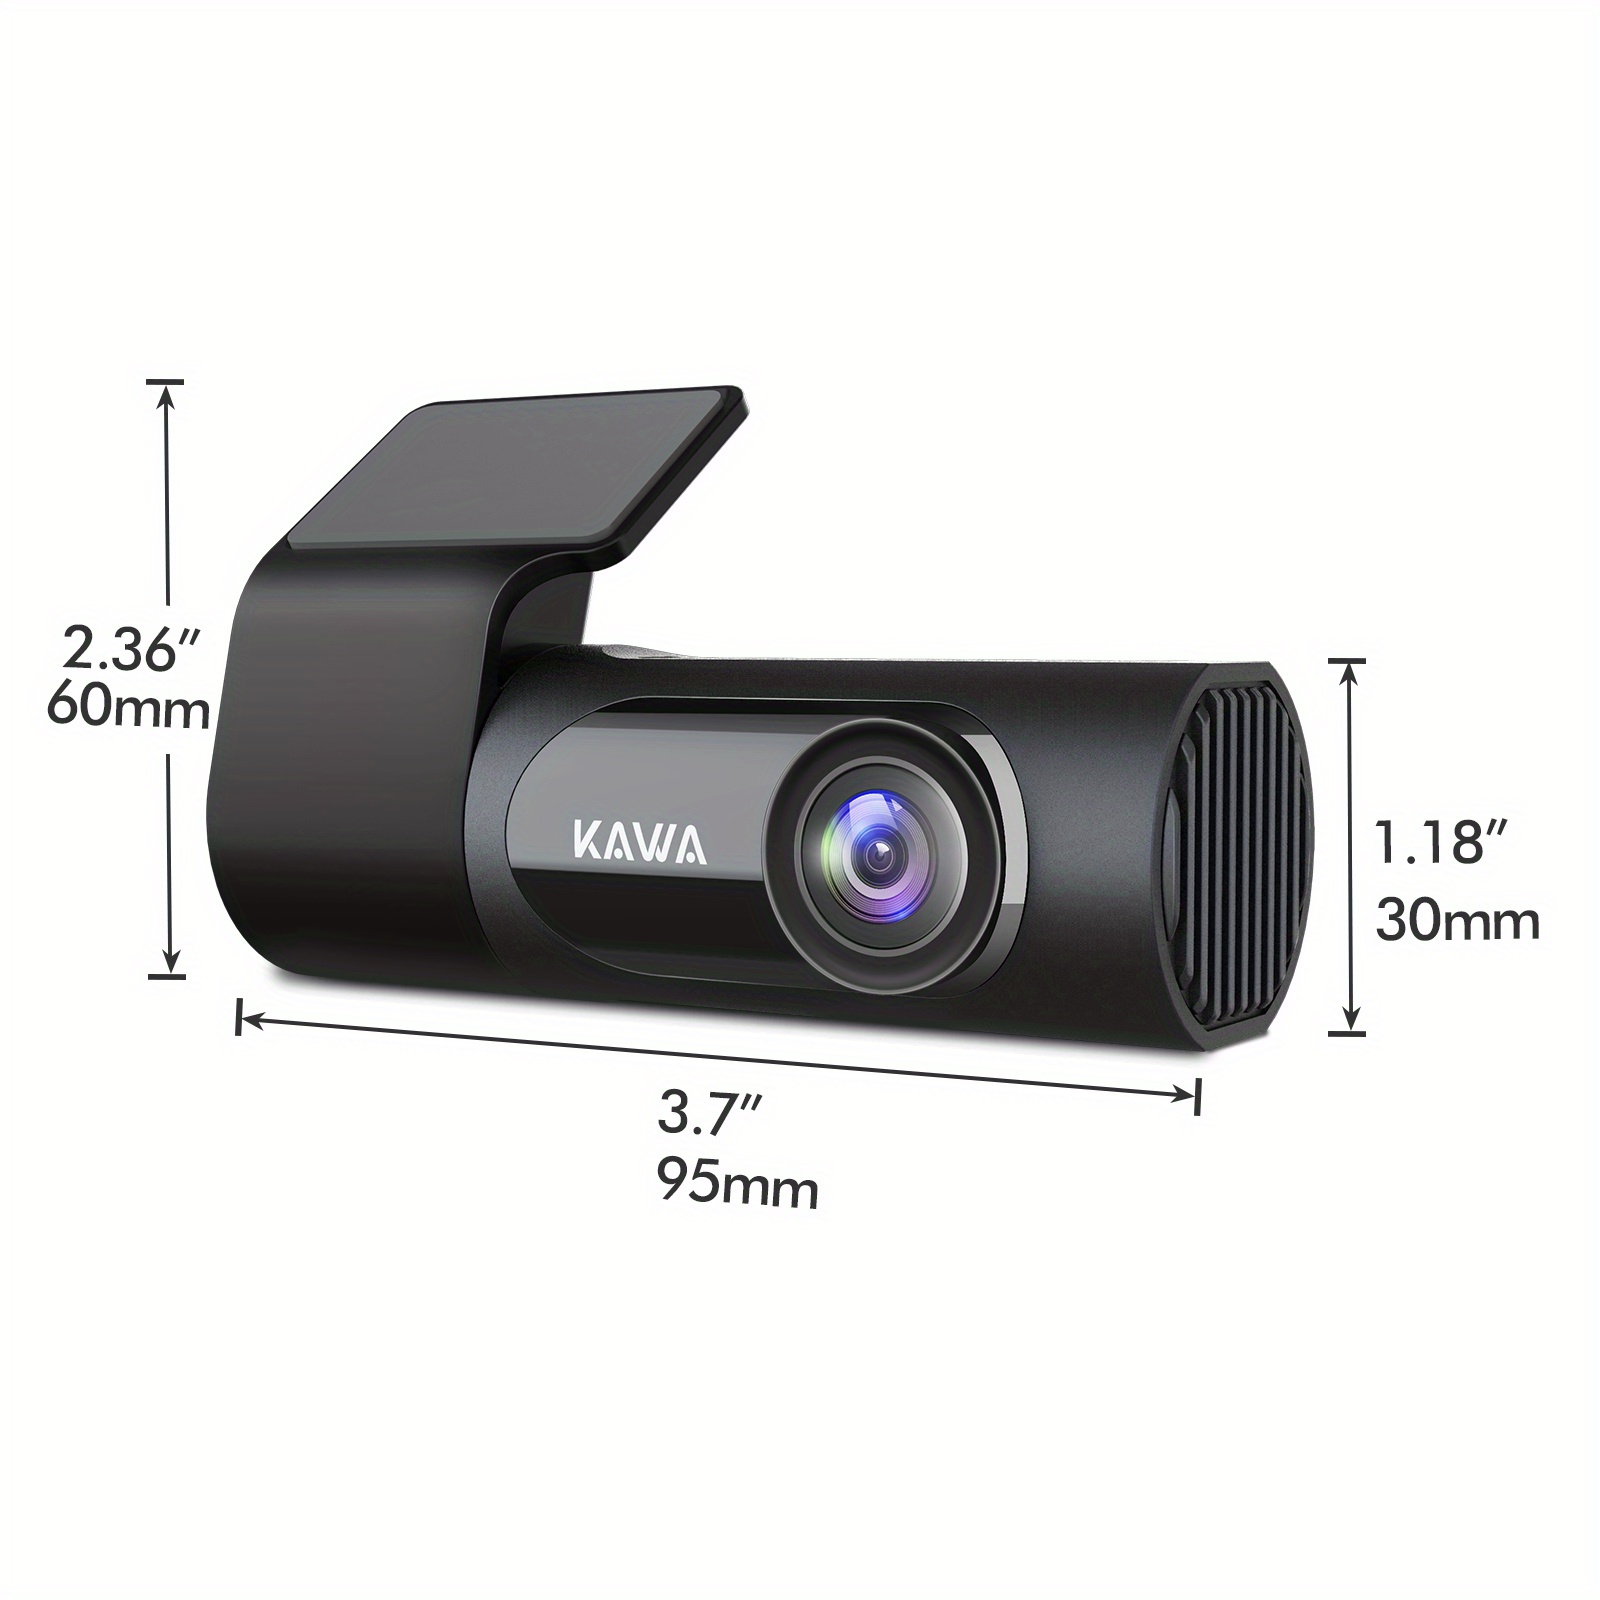 Review: Dash Cam 2K WiFi 1440P Car Camera - Ultimate Road Safety